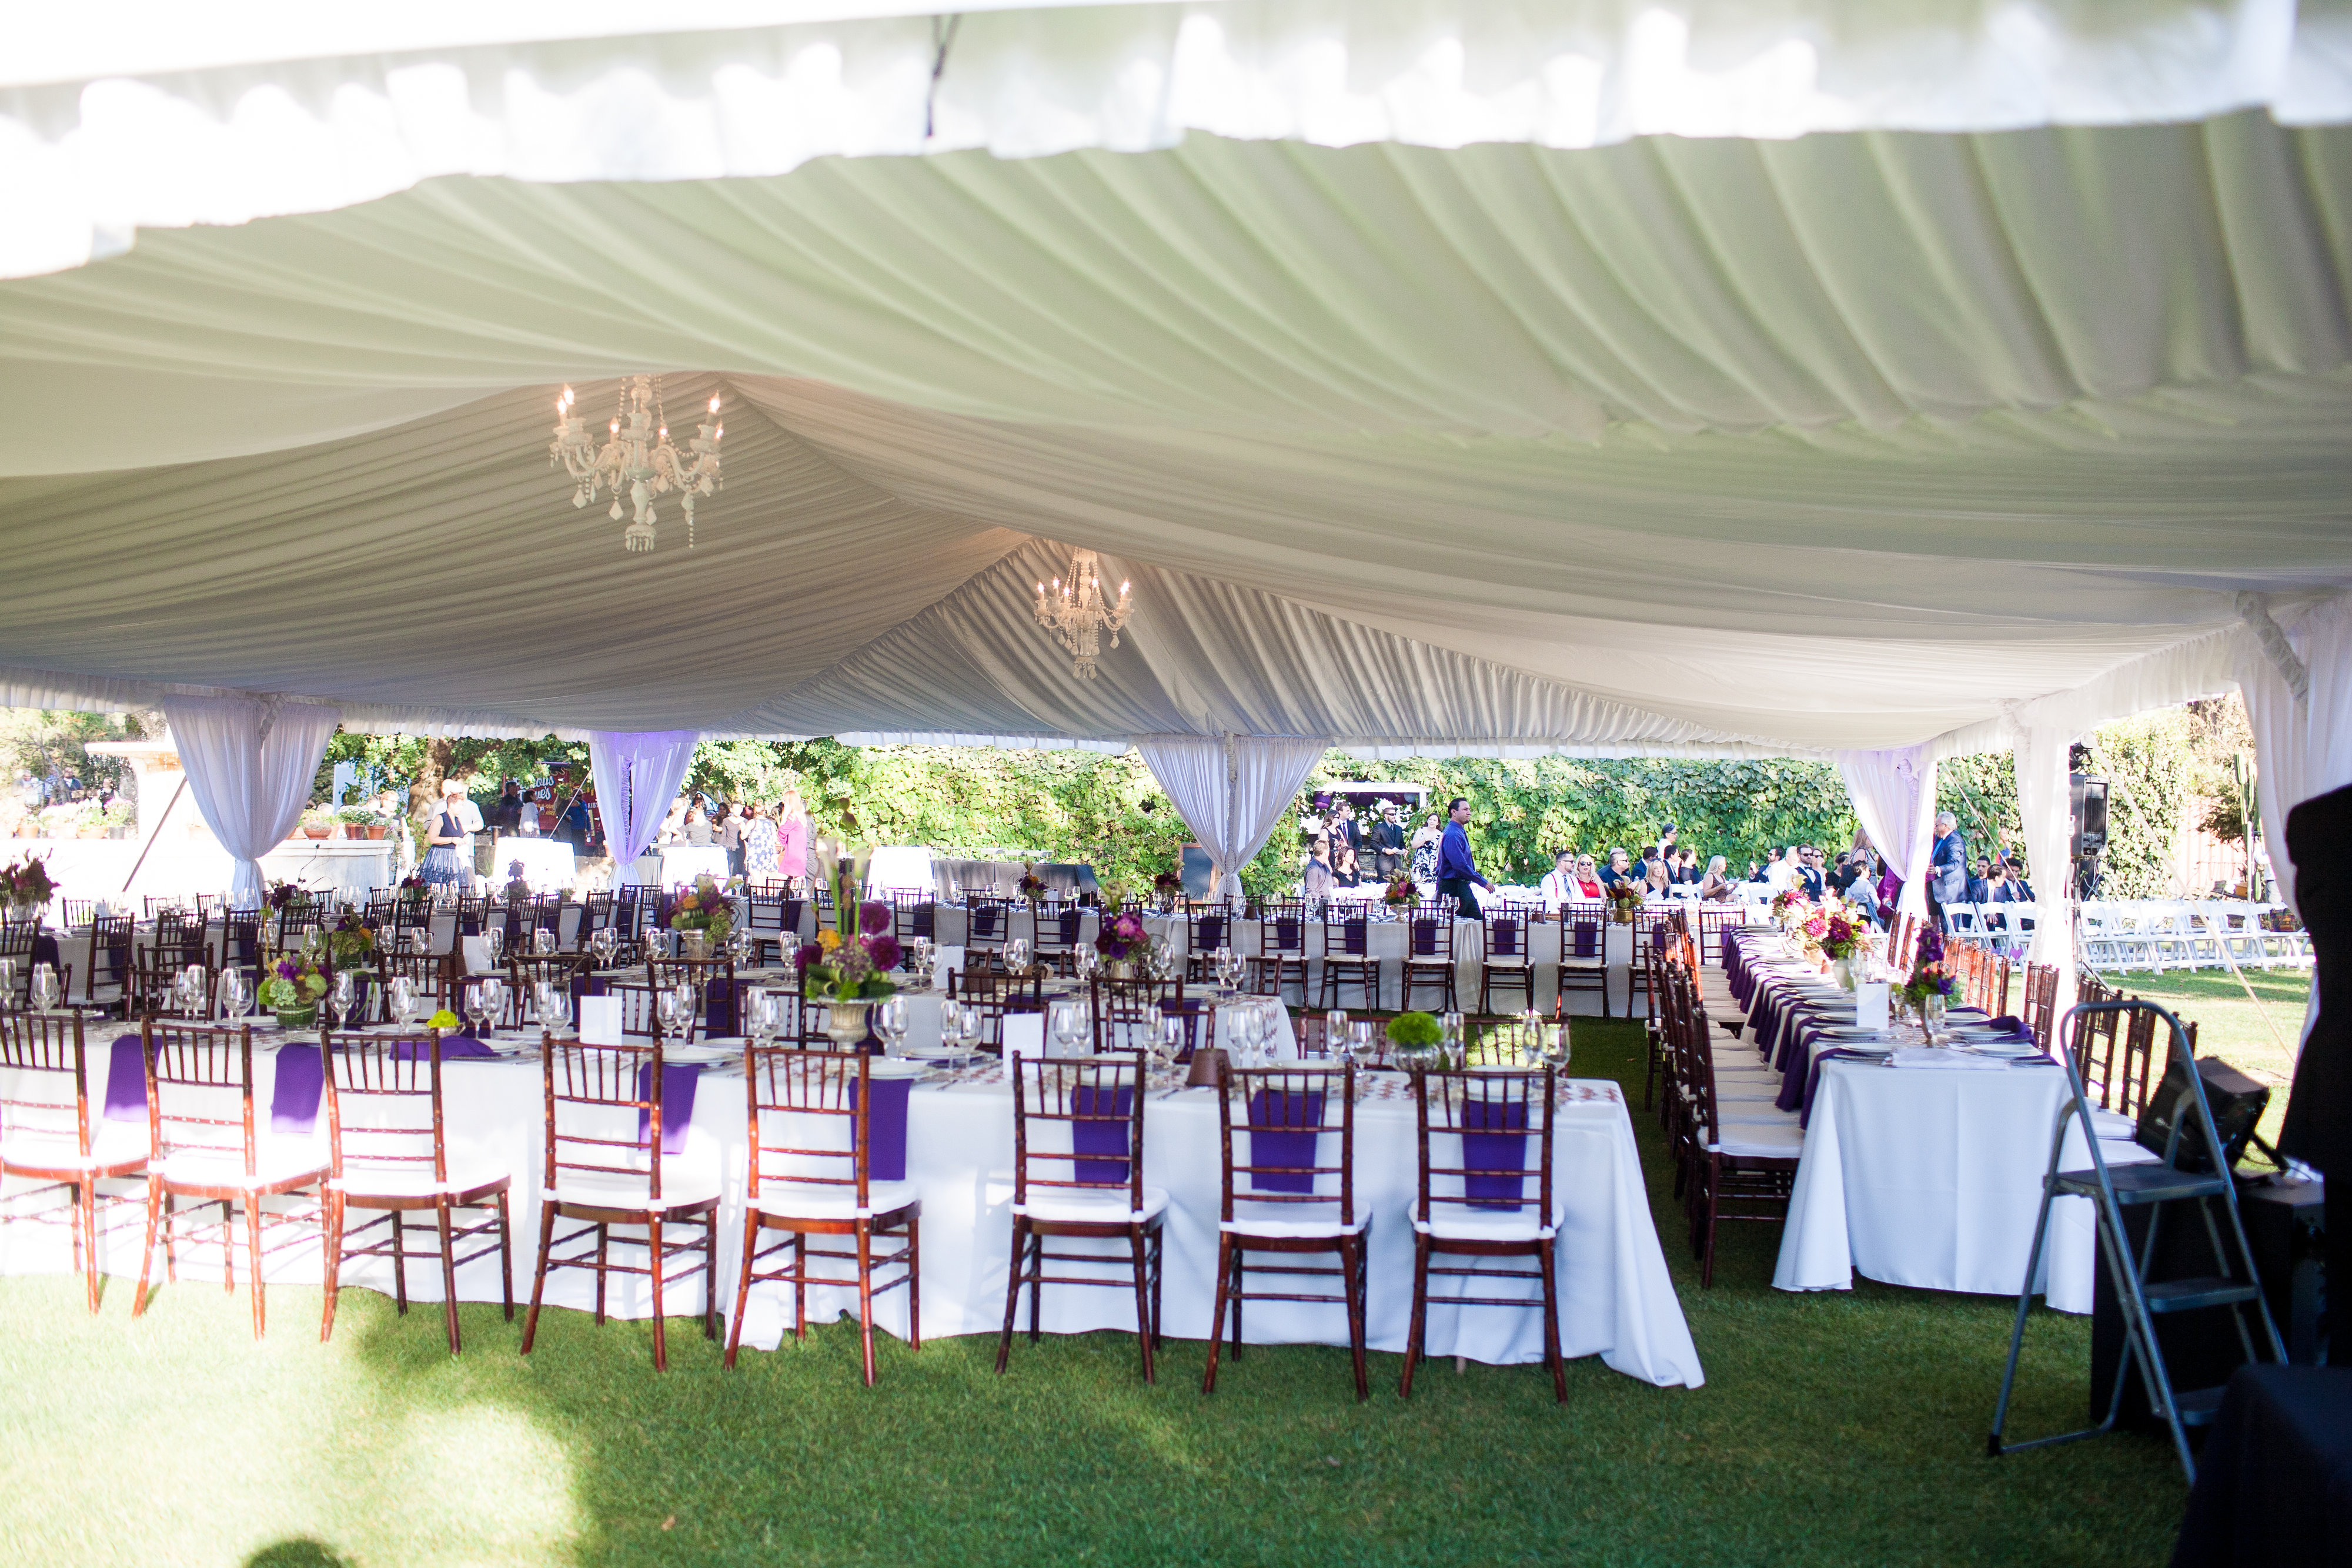 Wedding at Rancho Camulos; Captured by Joel Llacar Photography; Coordinated by Tasteful Tatters; Rentals, tent, dance floor, chandeliers by A-1 Event Rentals